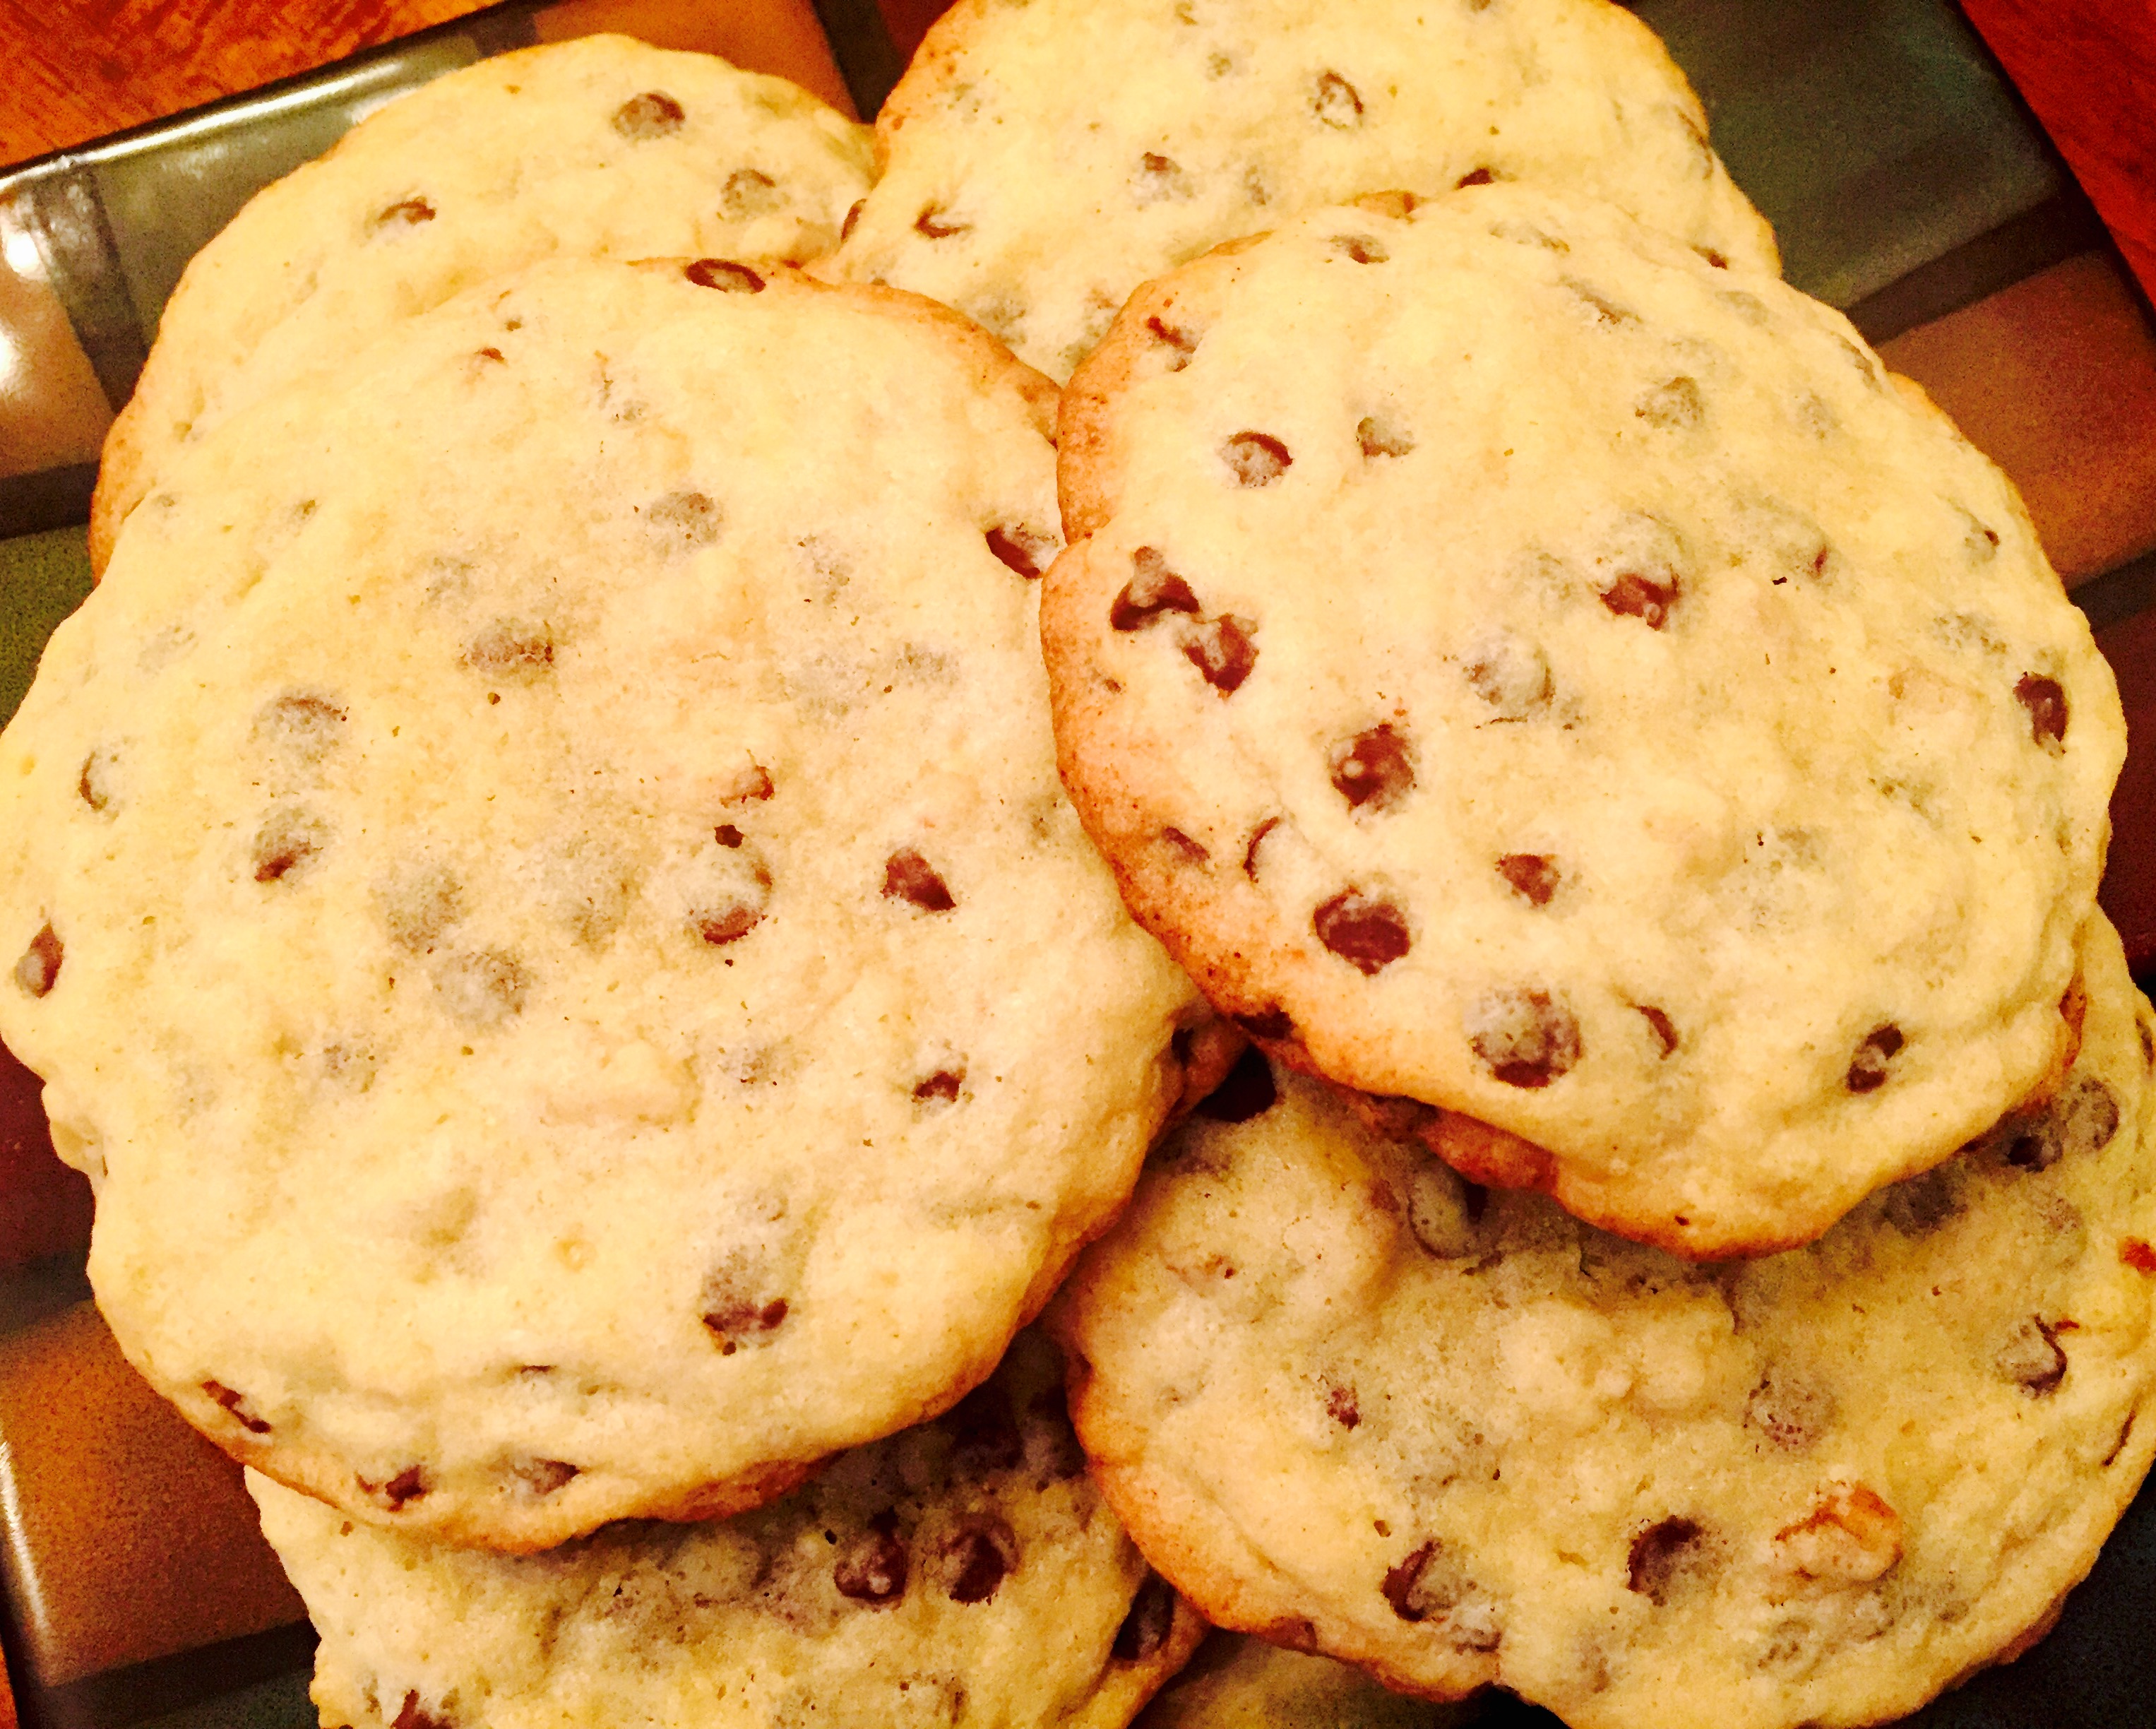 These soft and scrumptious chocolate chip cookies are dairy & gluten free